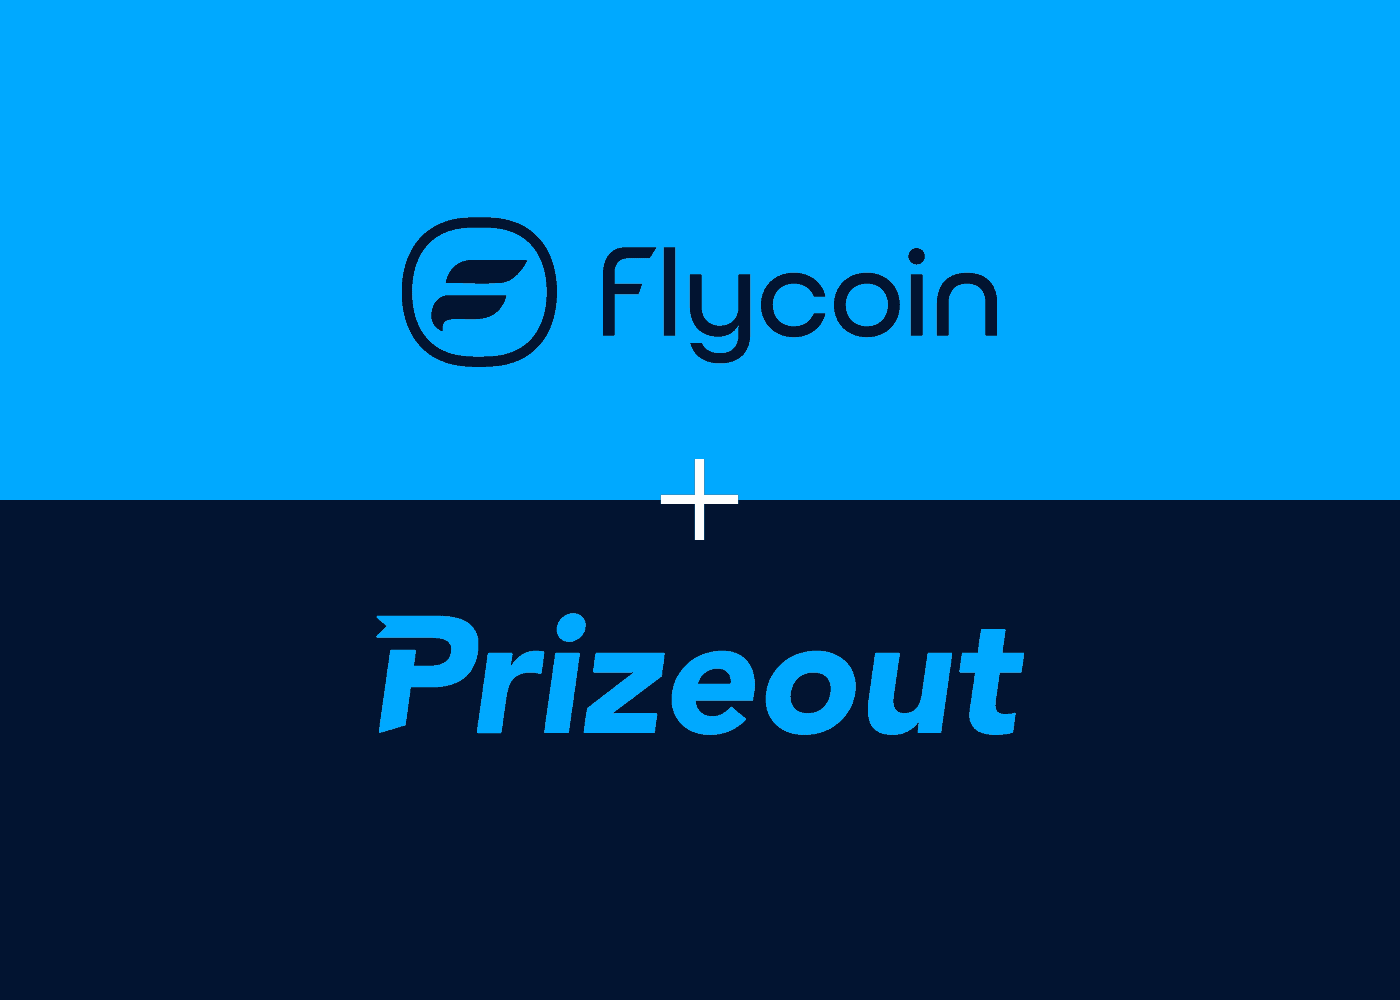 Flycoin and Prizeout Logos